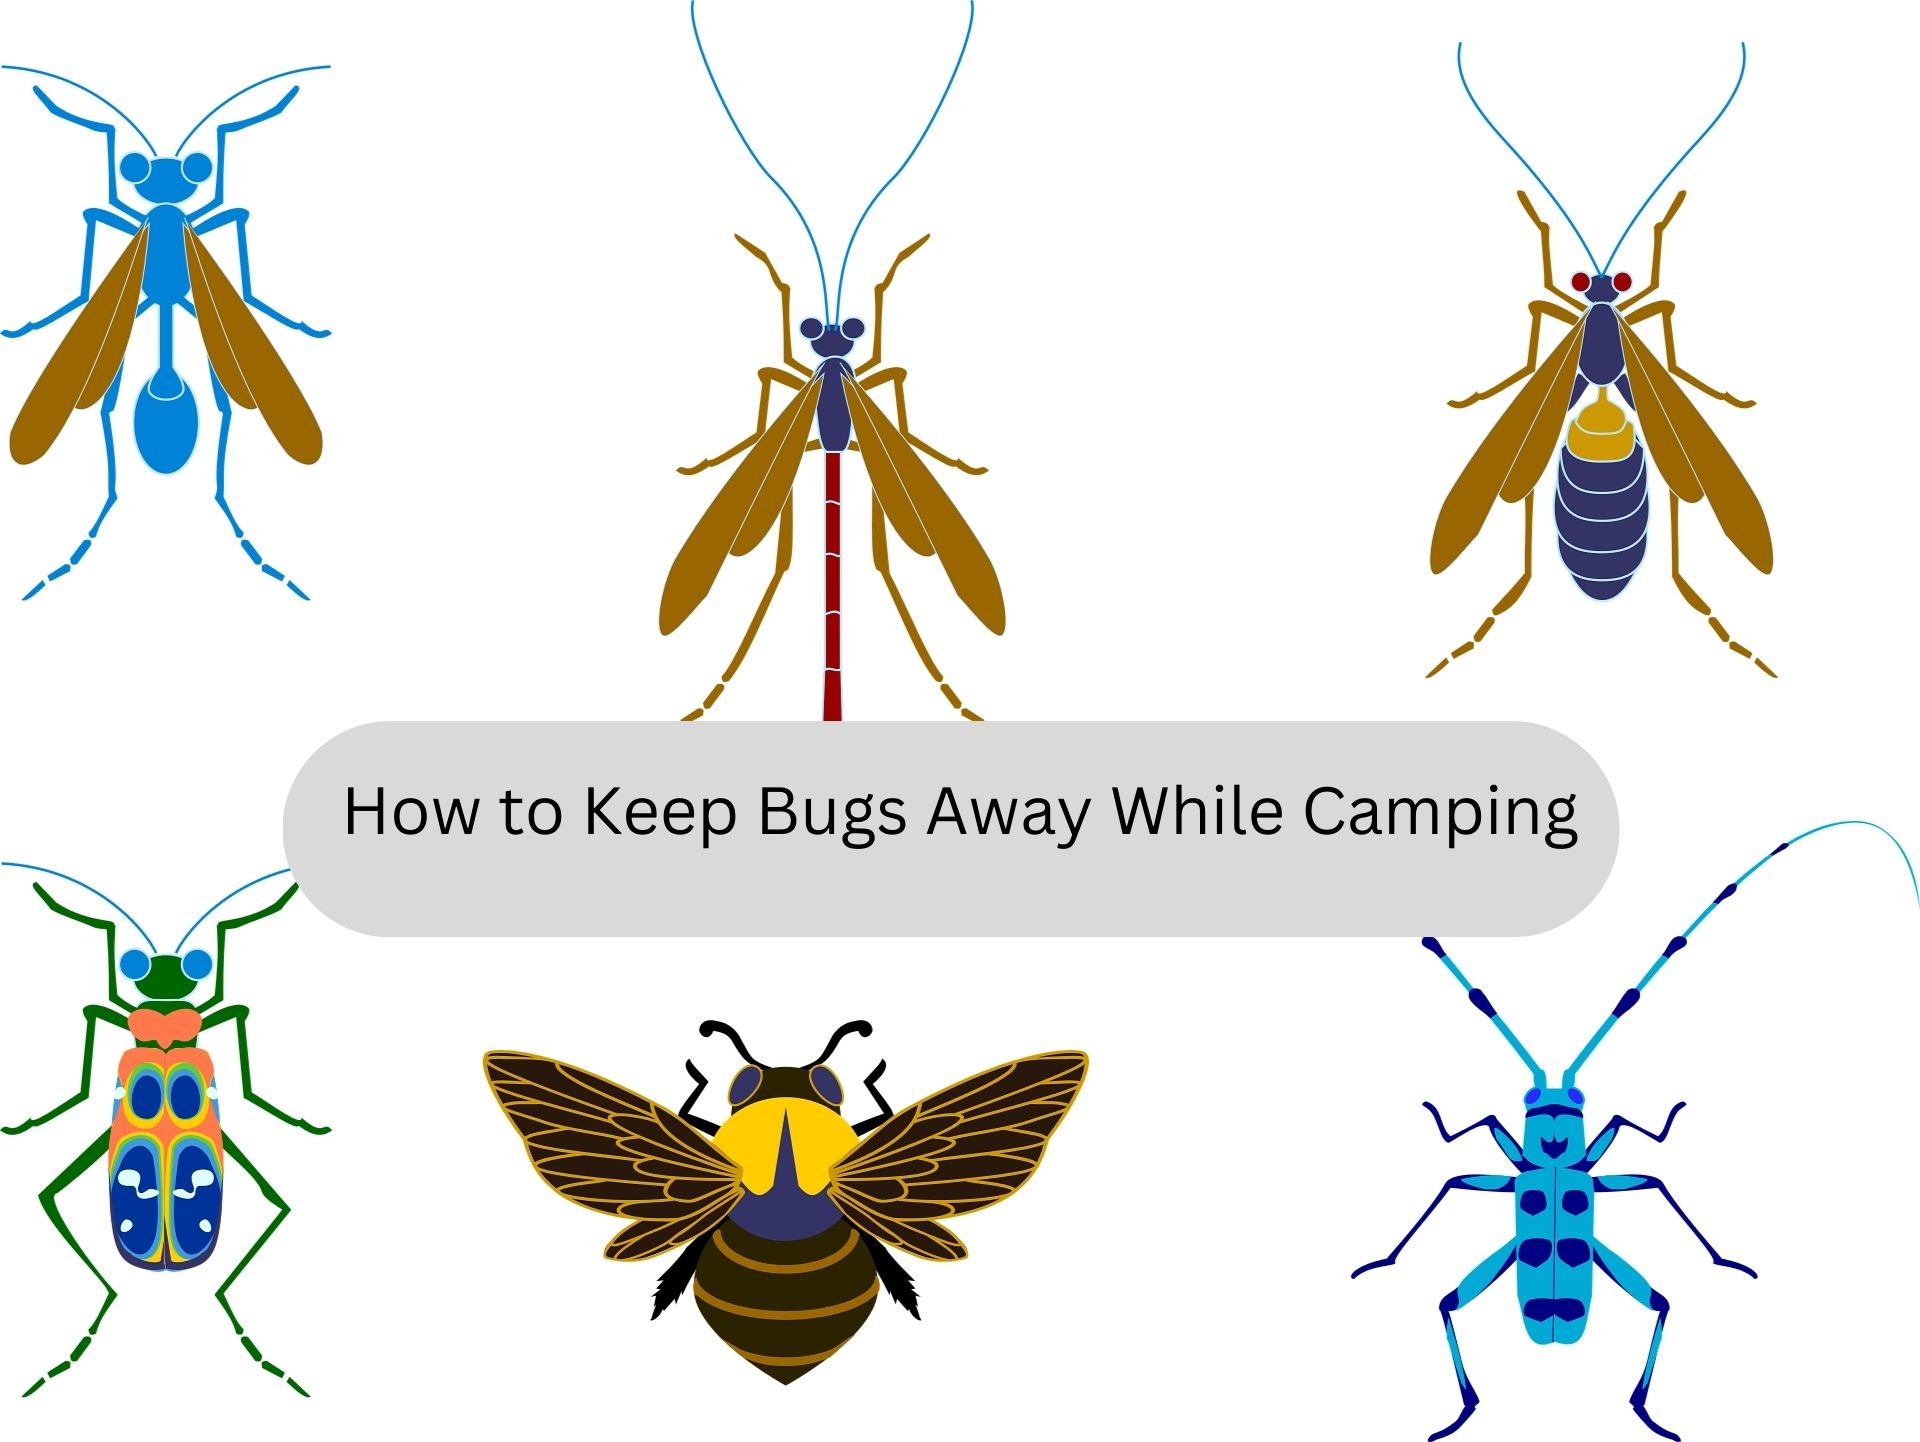 How to Keep Bugs Away While Camping